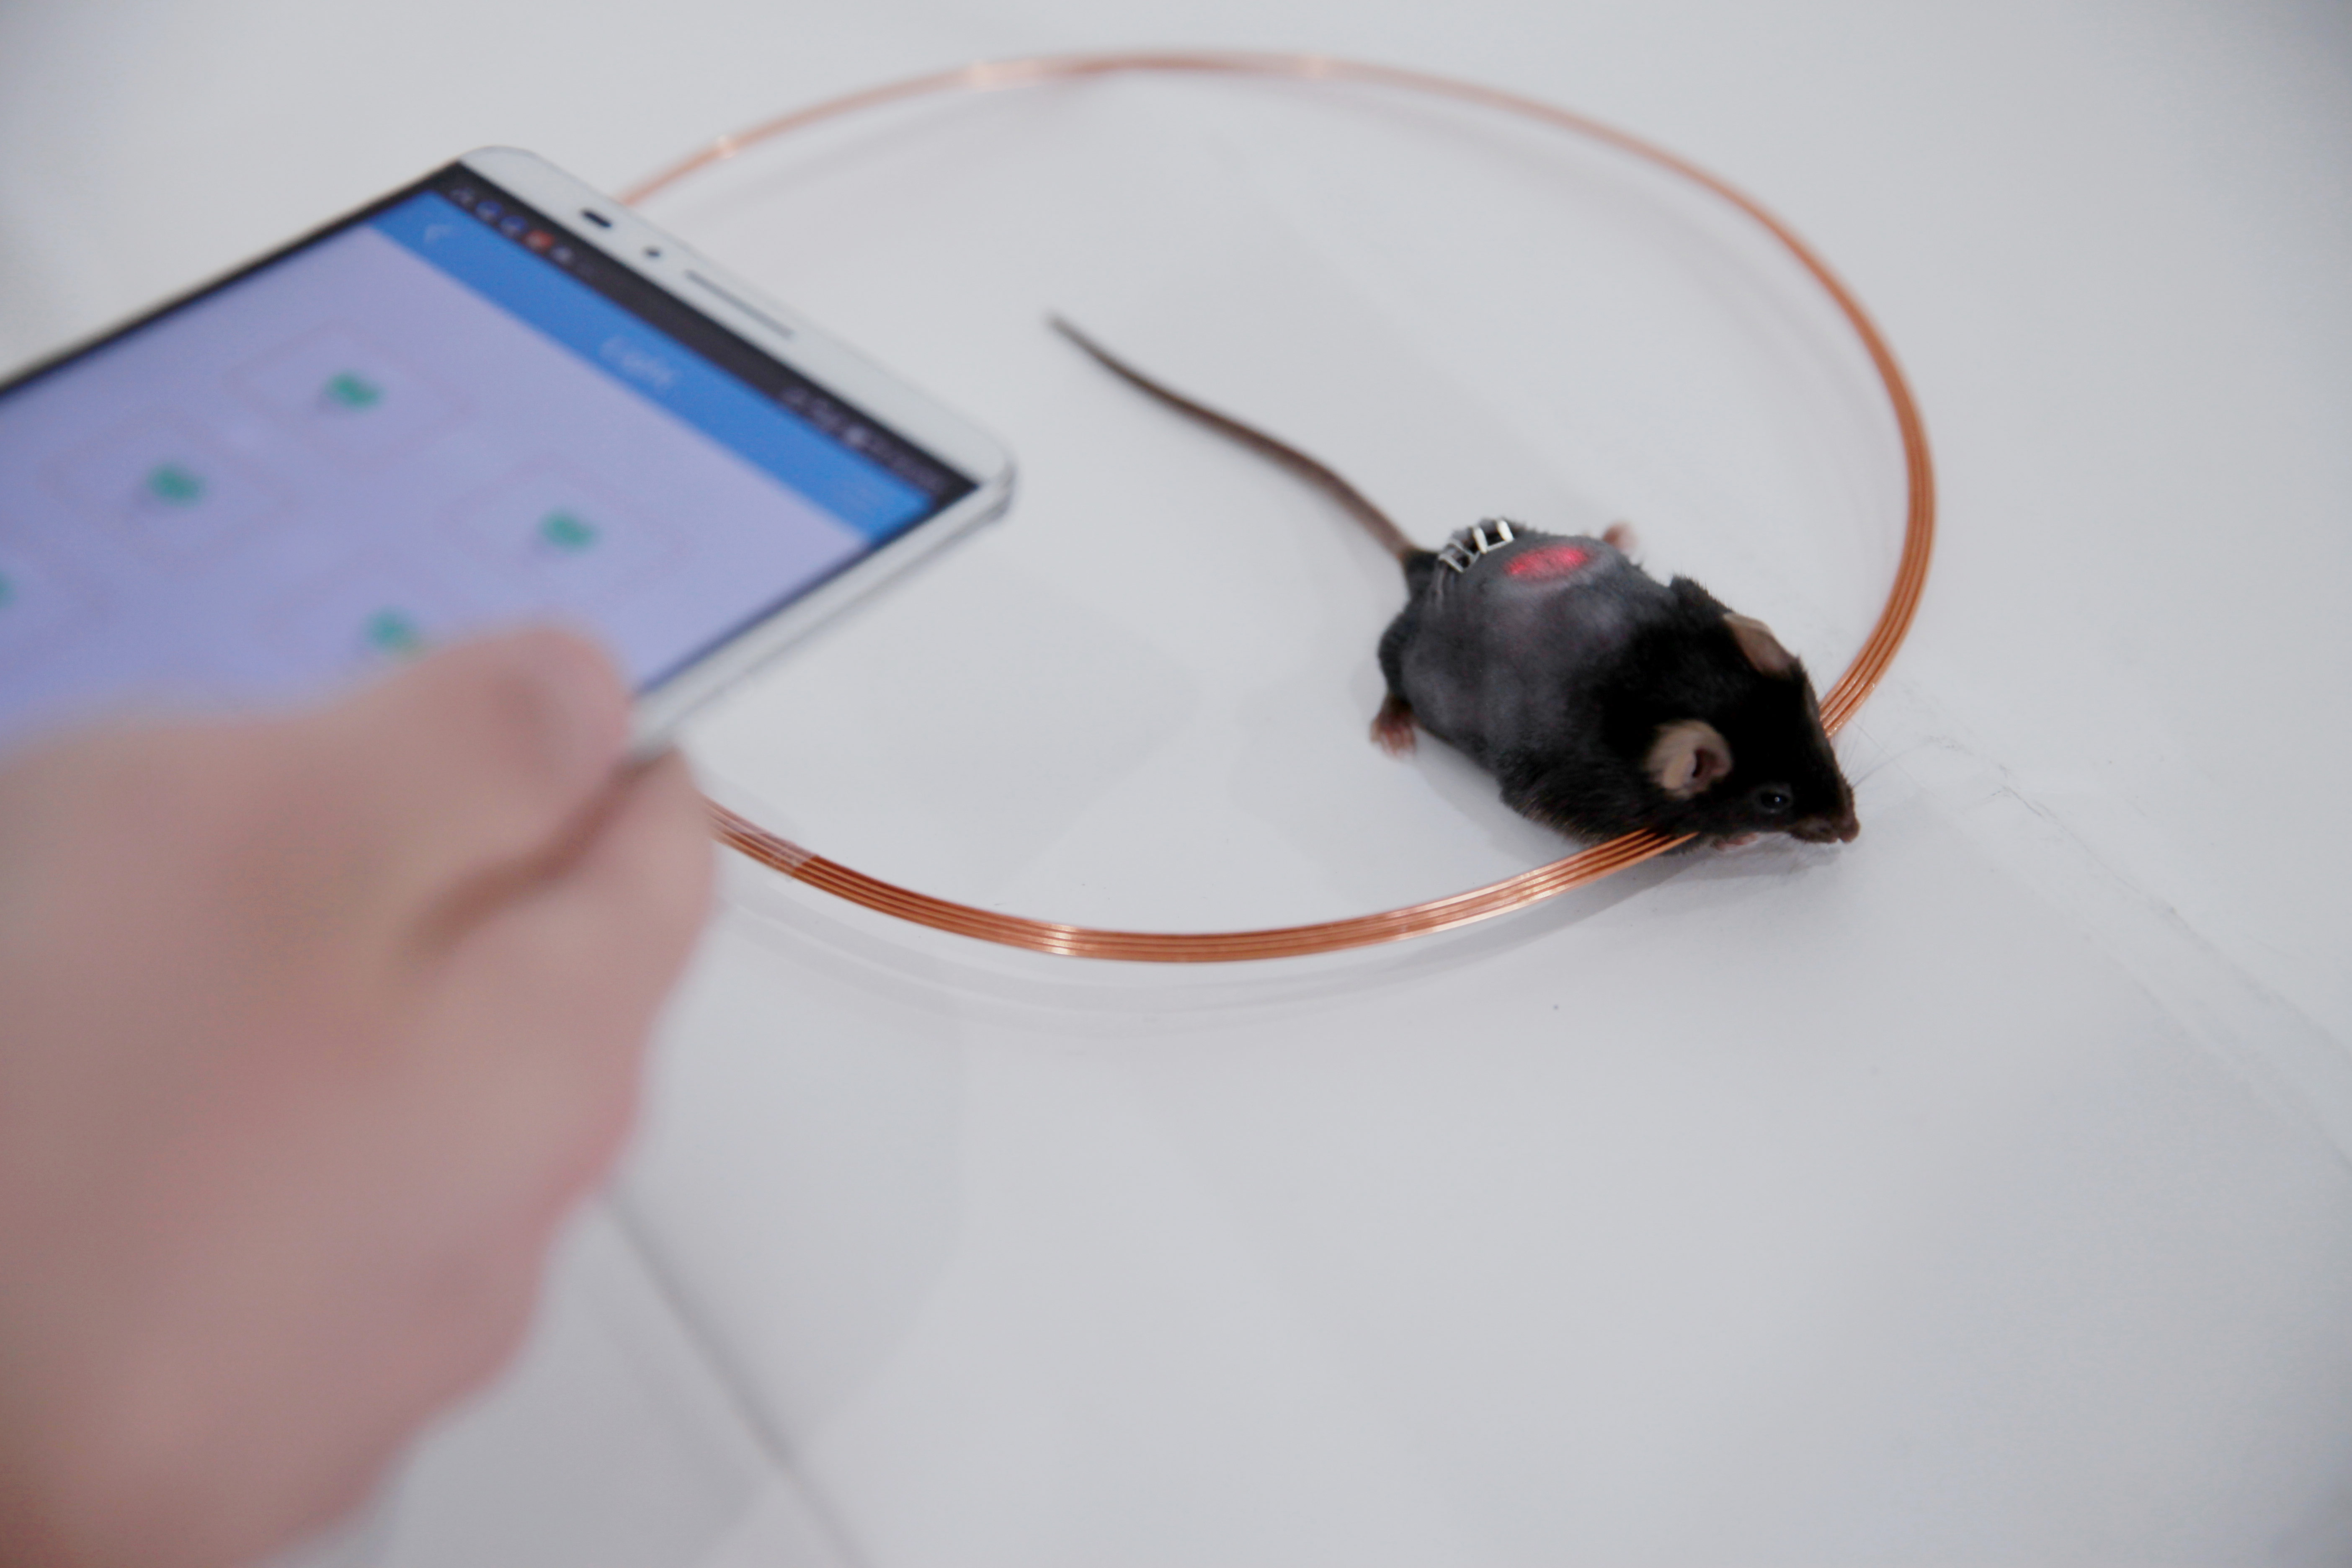 A researcher uses a smartphone to control light levels in mice with implanted LED discs.